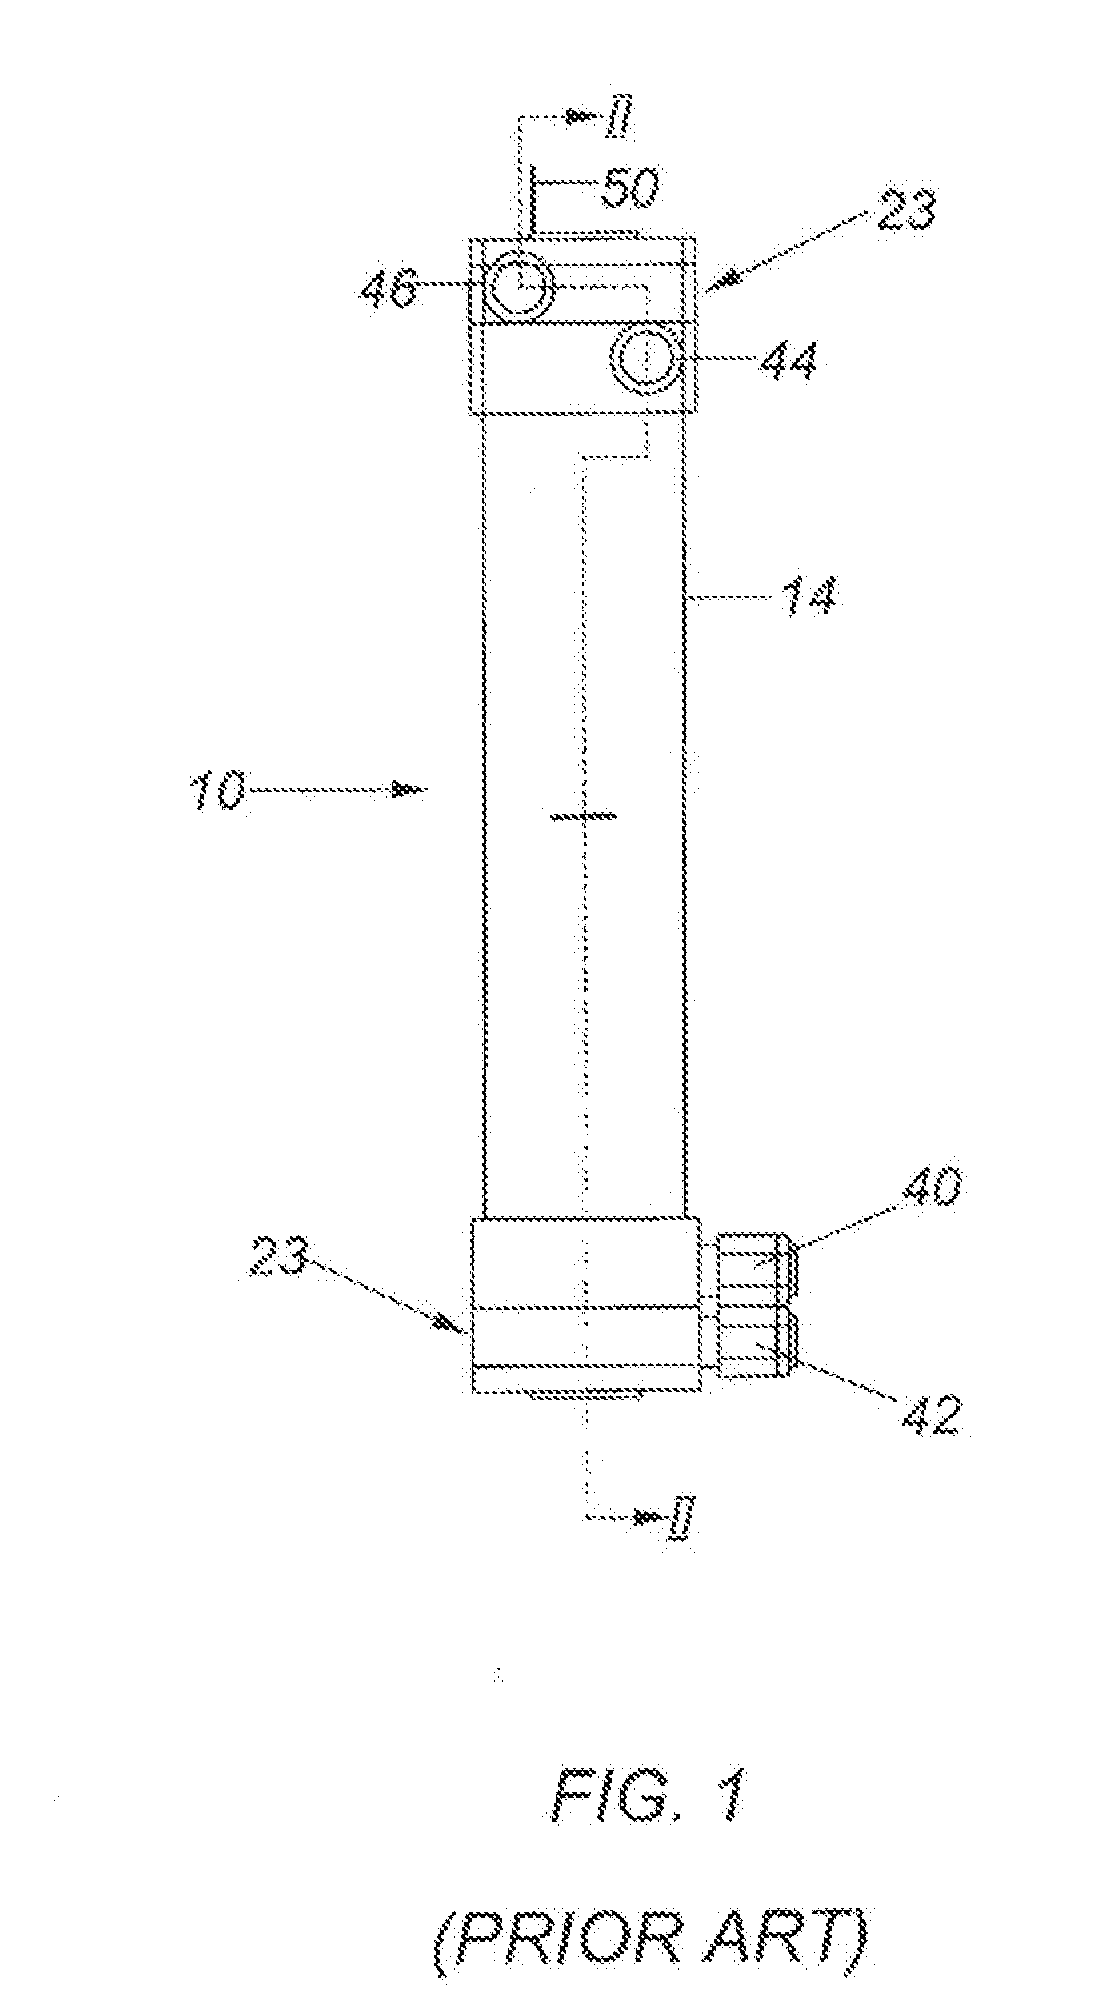 Dual Diaphragm Electrolysis cell assembly and method for generating a cleaning solution without any salt residues and simultaneously generating a sanitizing solution having a predetermined level of available free chlorine and PH